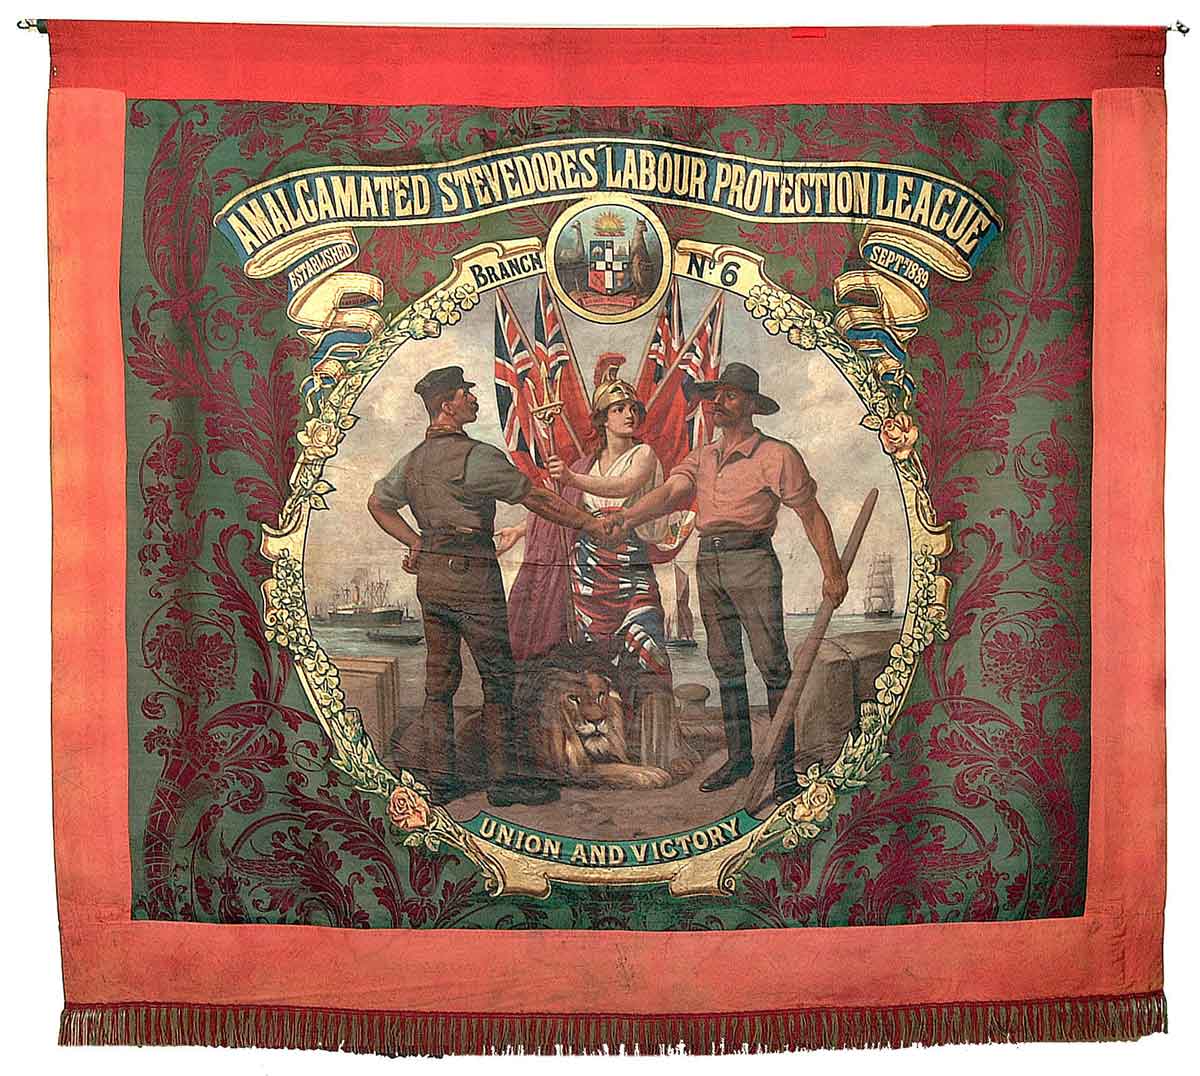 Banner of the 'Amalgamated Stevedores Labour Protection league' Branch No.6. This banner was created to commemorate the founding of the trade union following the Great Dock Strike of 1889.